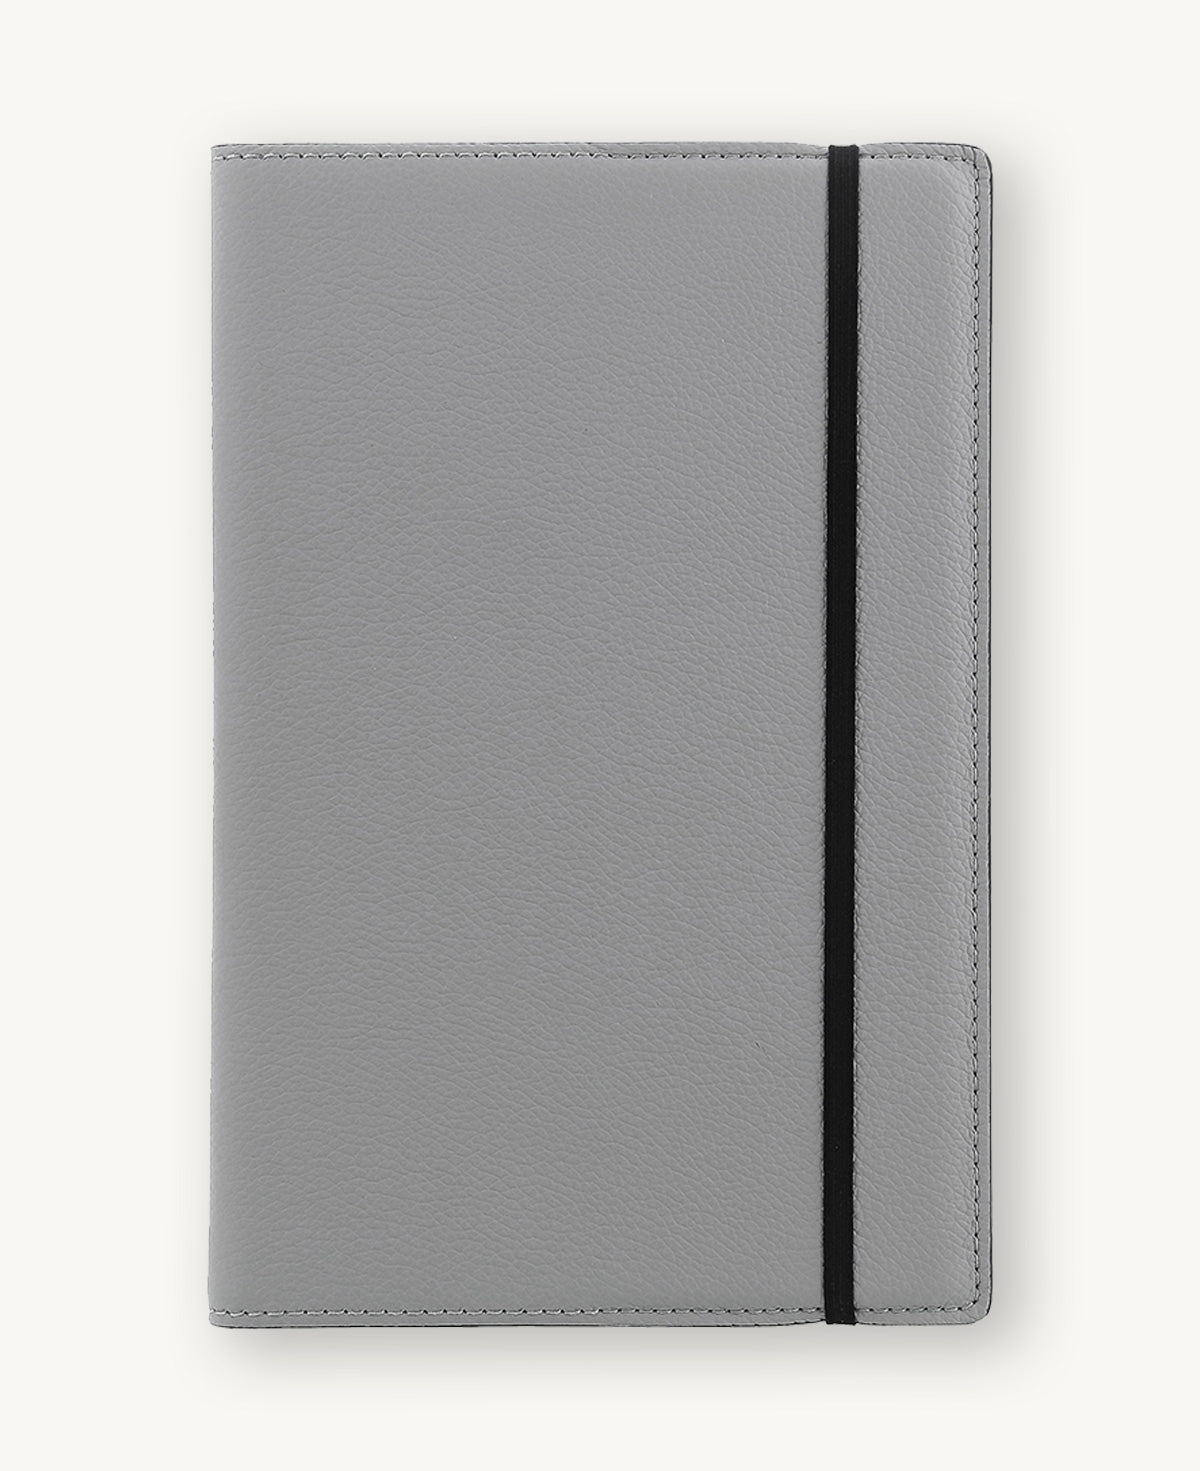 NOTEBOOK LARGE GREY